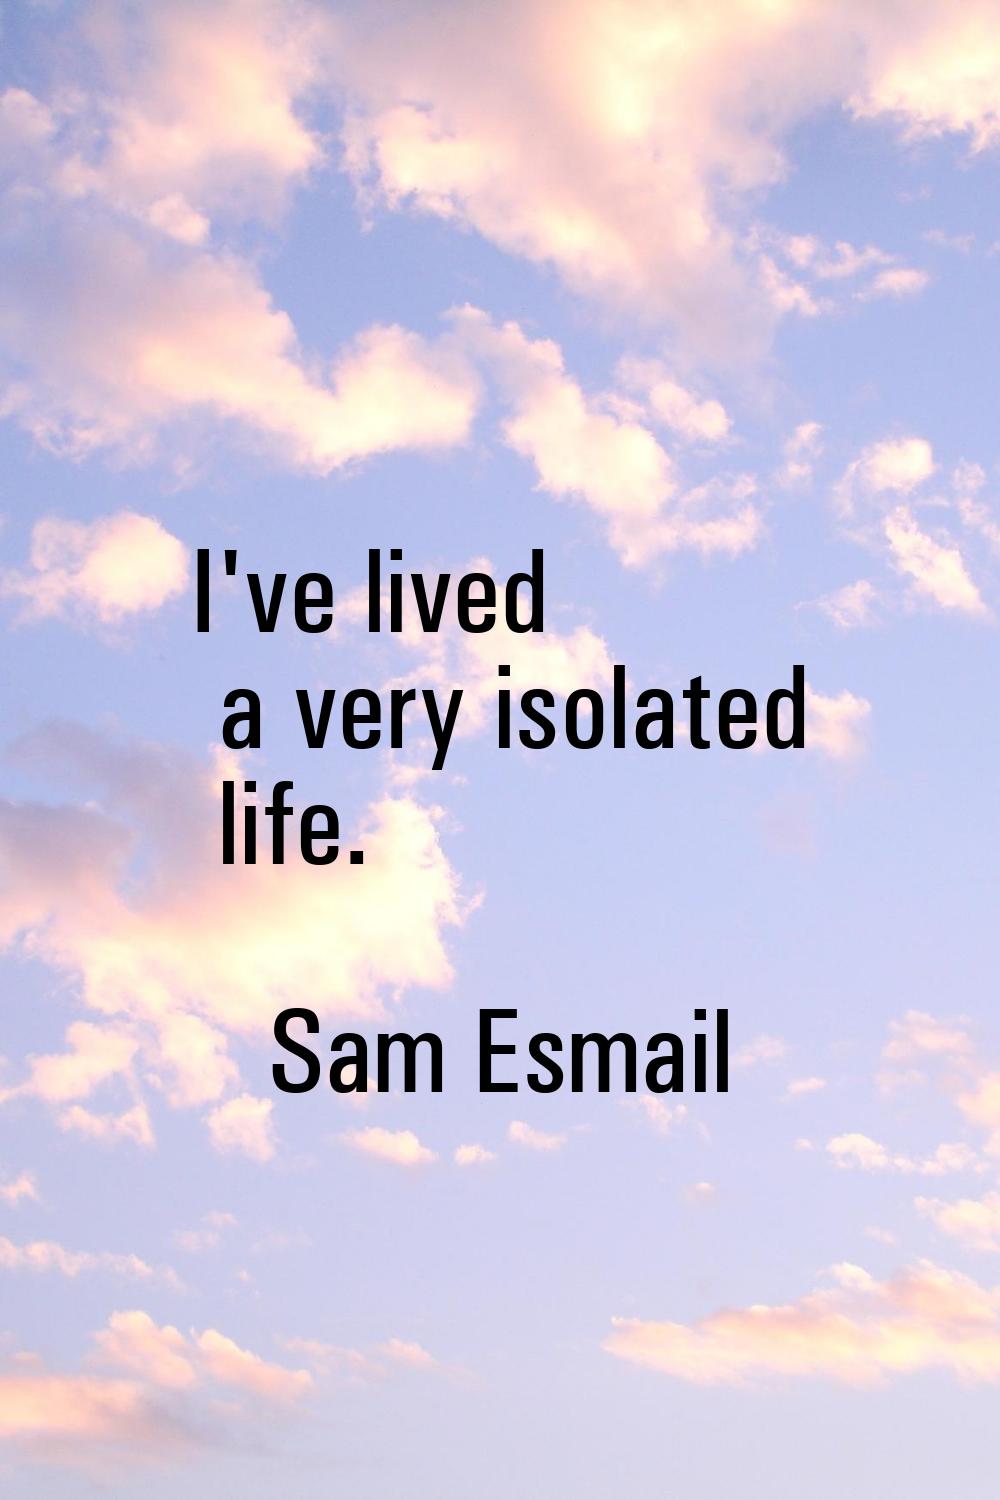 I've lived a very isolated life.